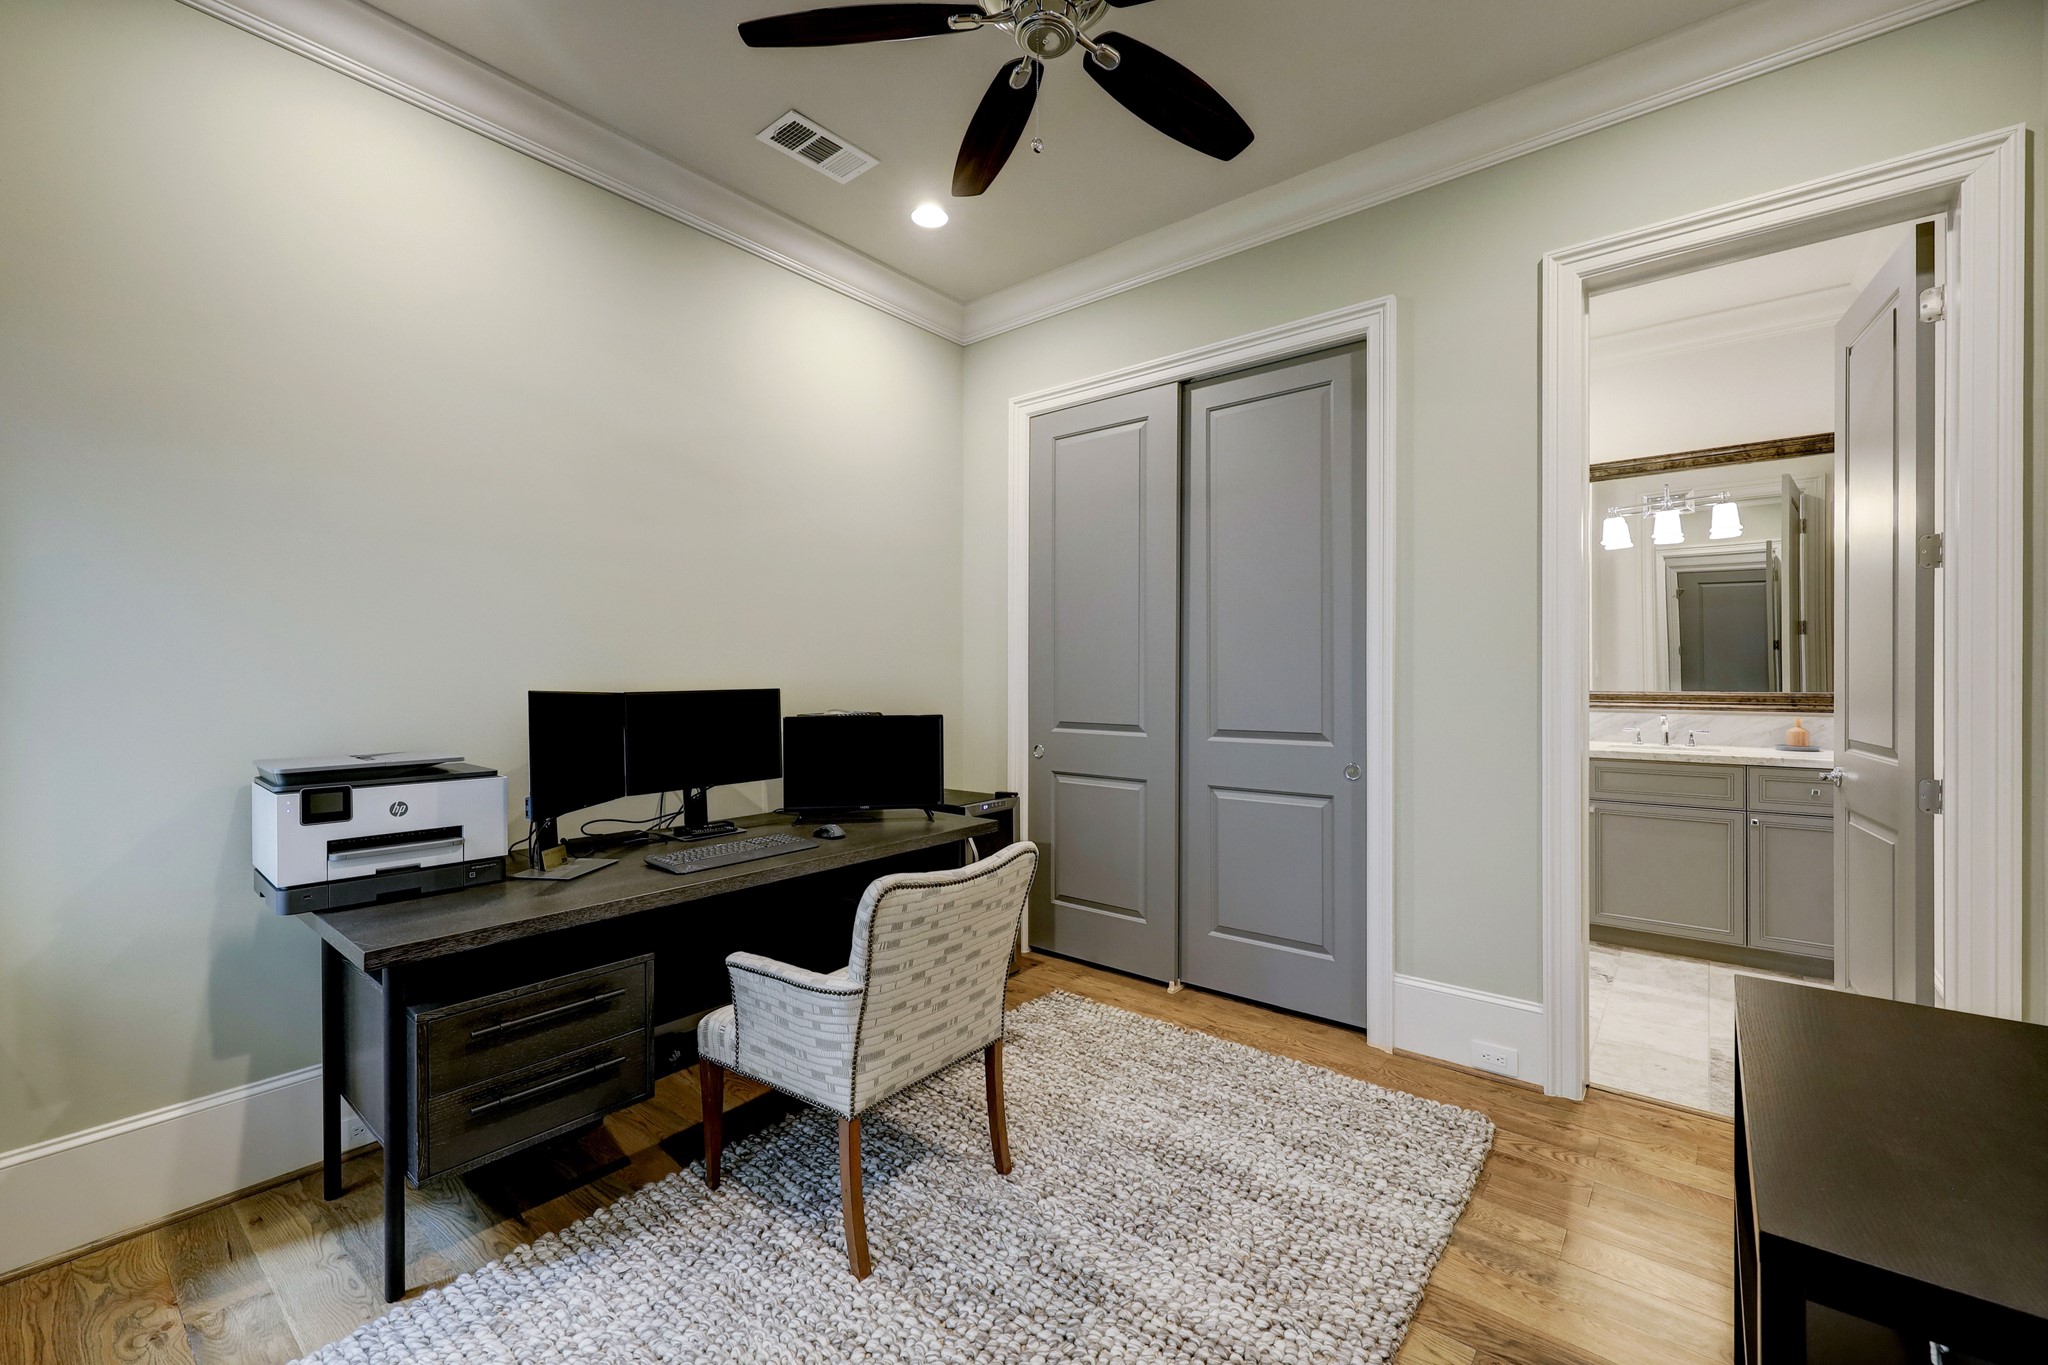 The downstairs secondary bedroom is perfect for a home office or guest room. It features wood flooring, an en-suite bathroom, and access to the backyard.